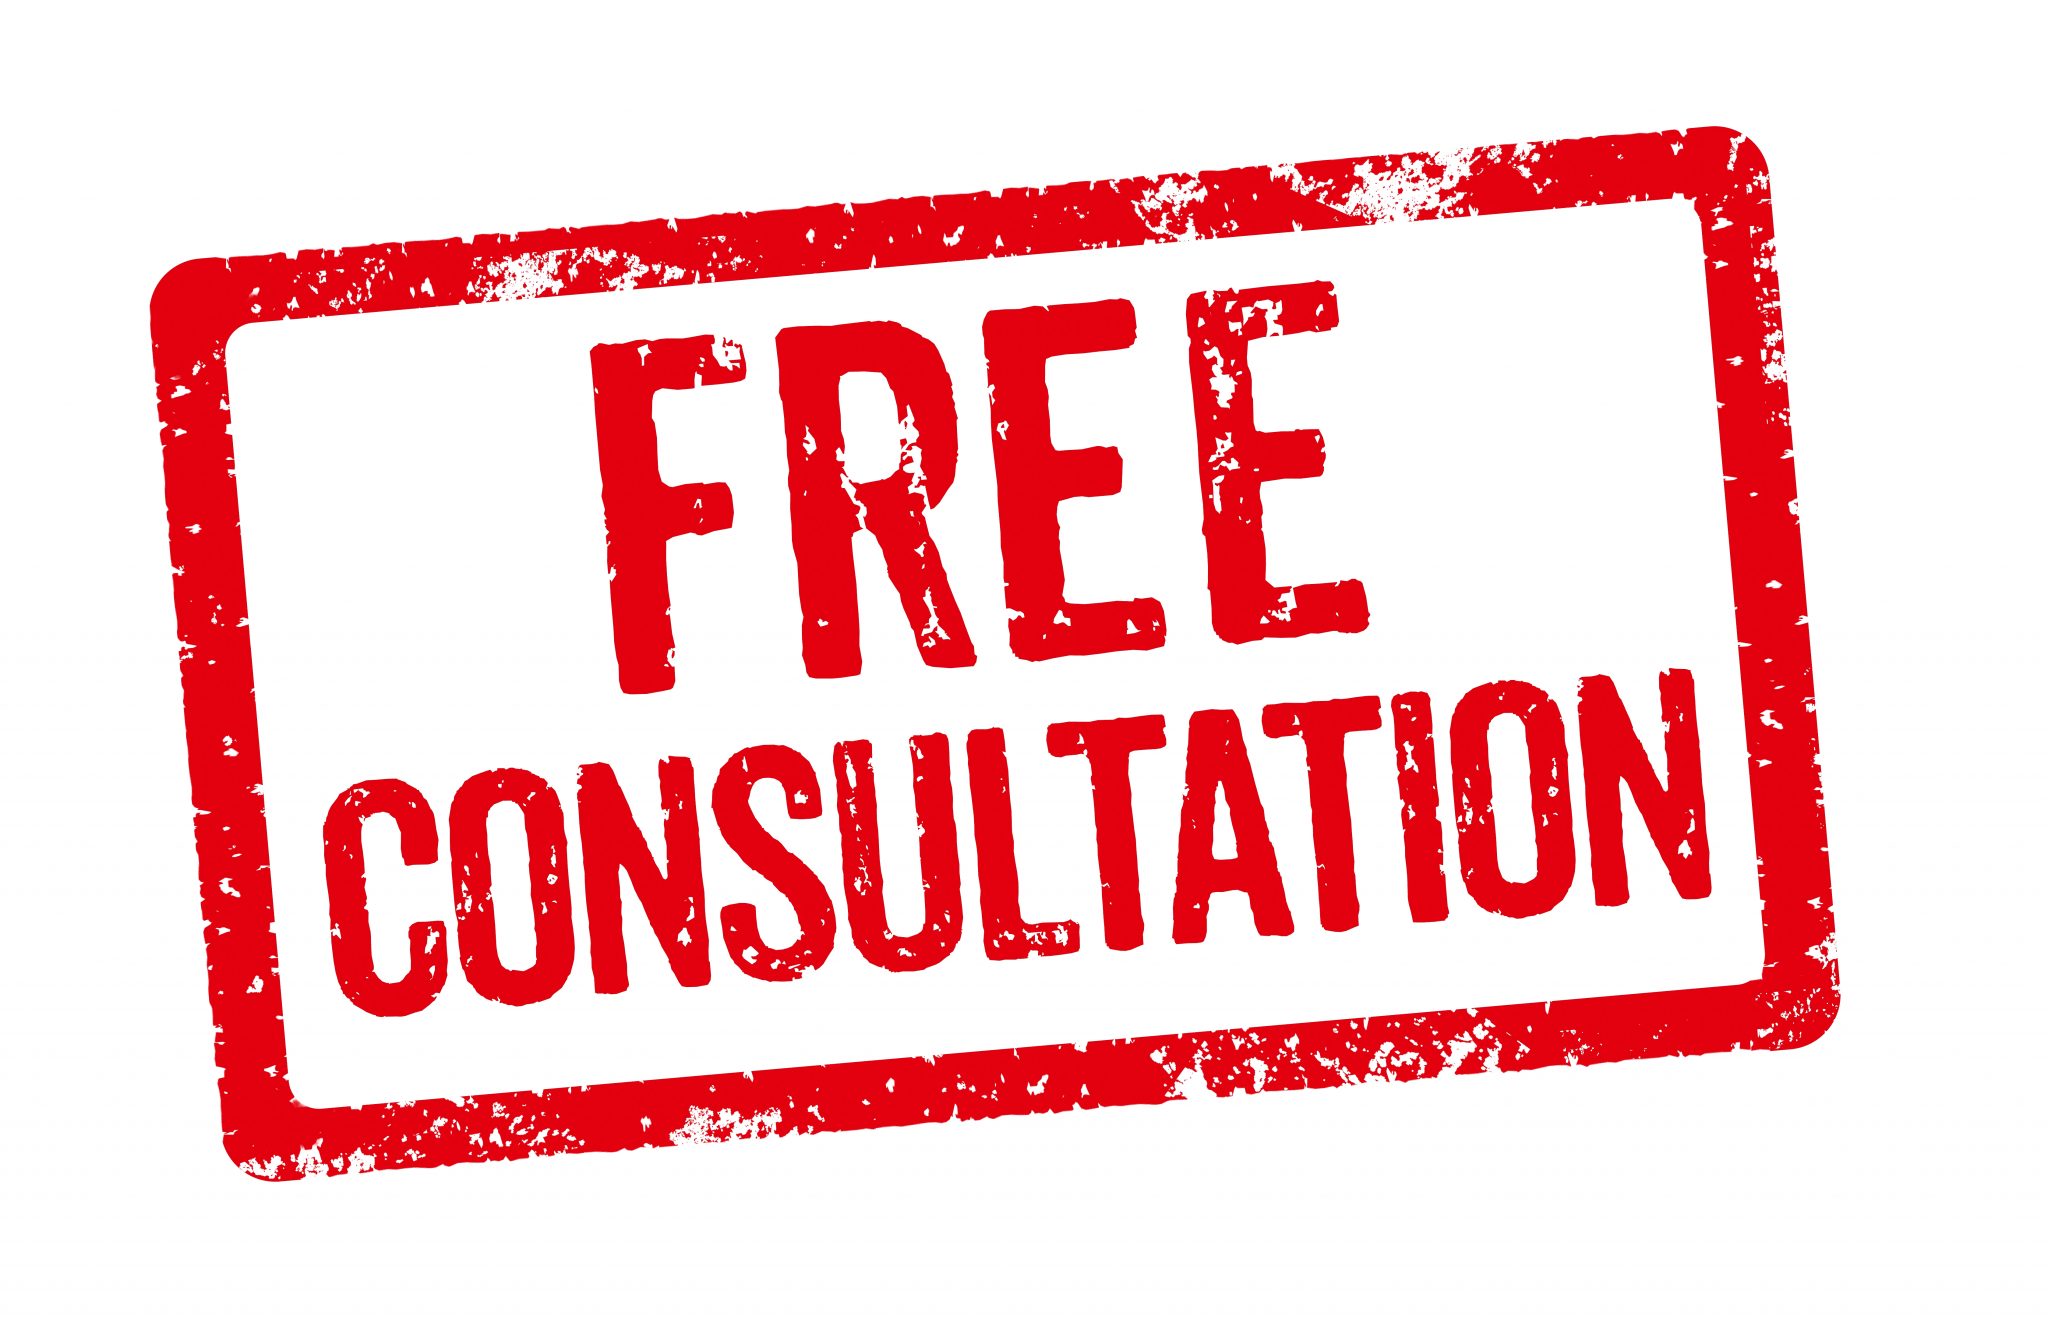 Red Stamp - Free Consultation - email deliverability consultation